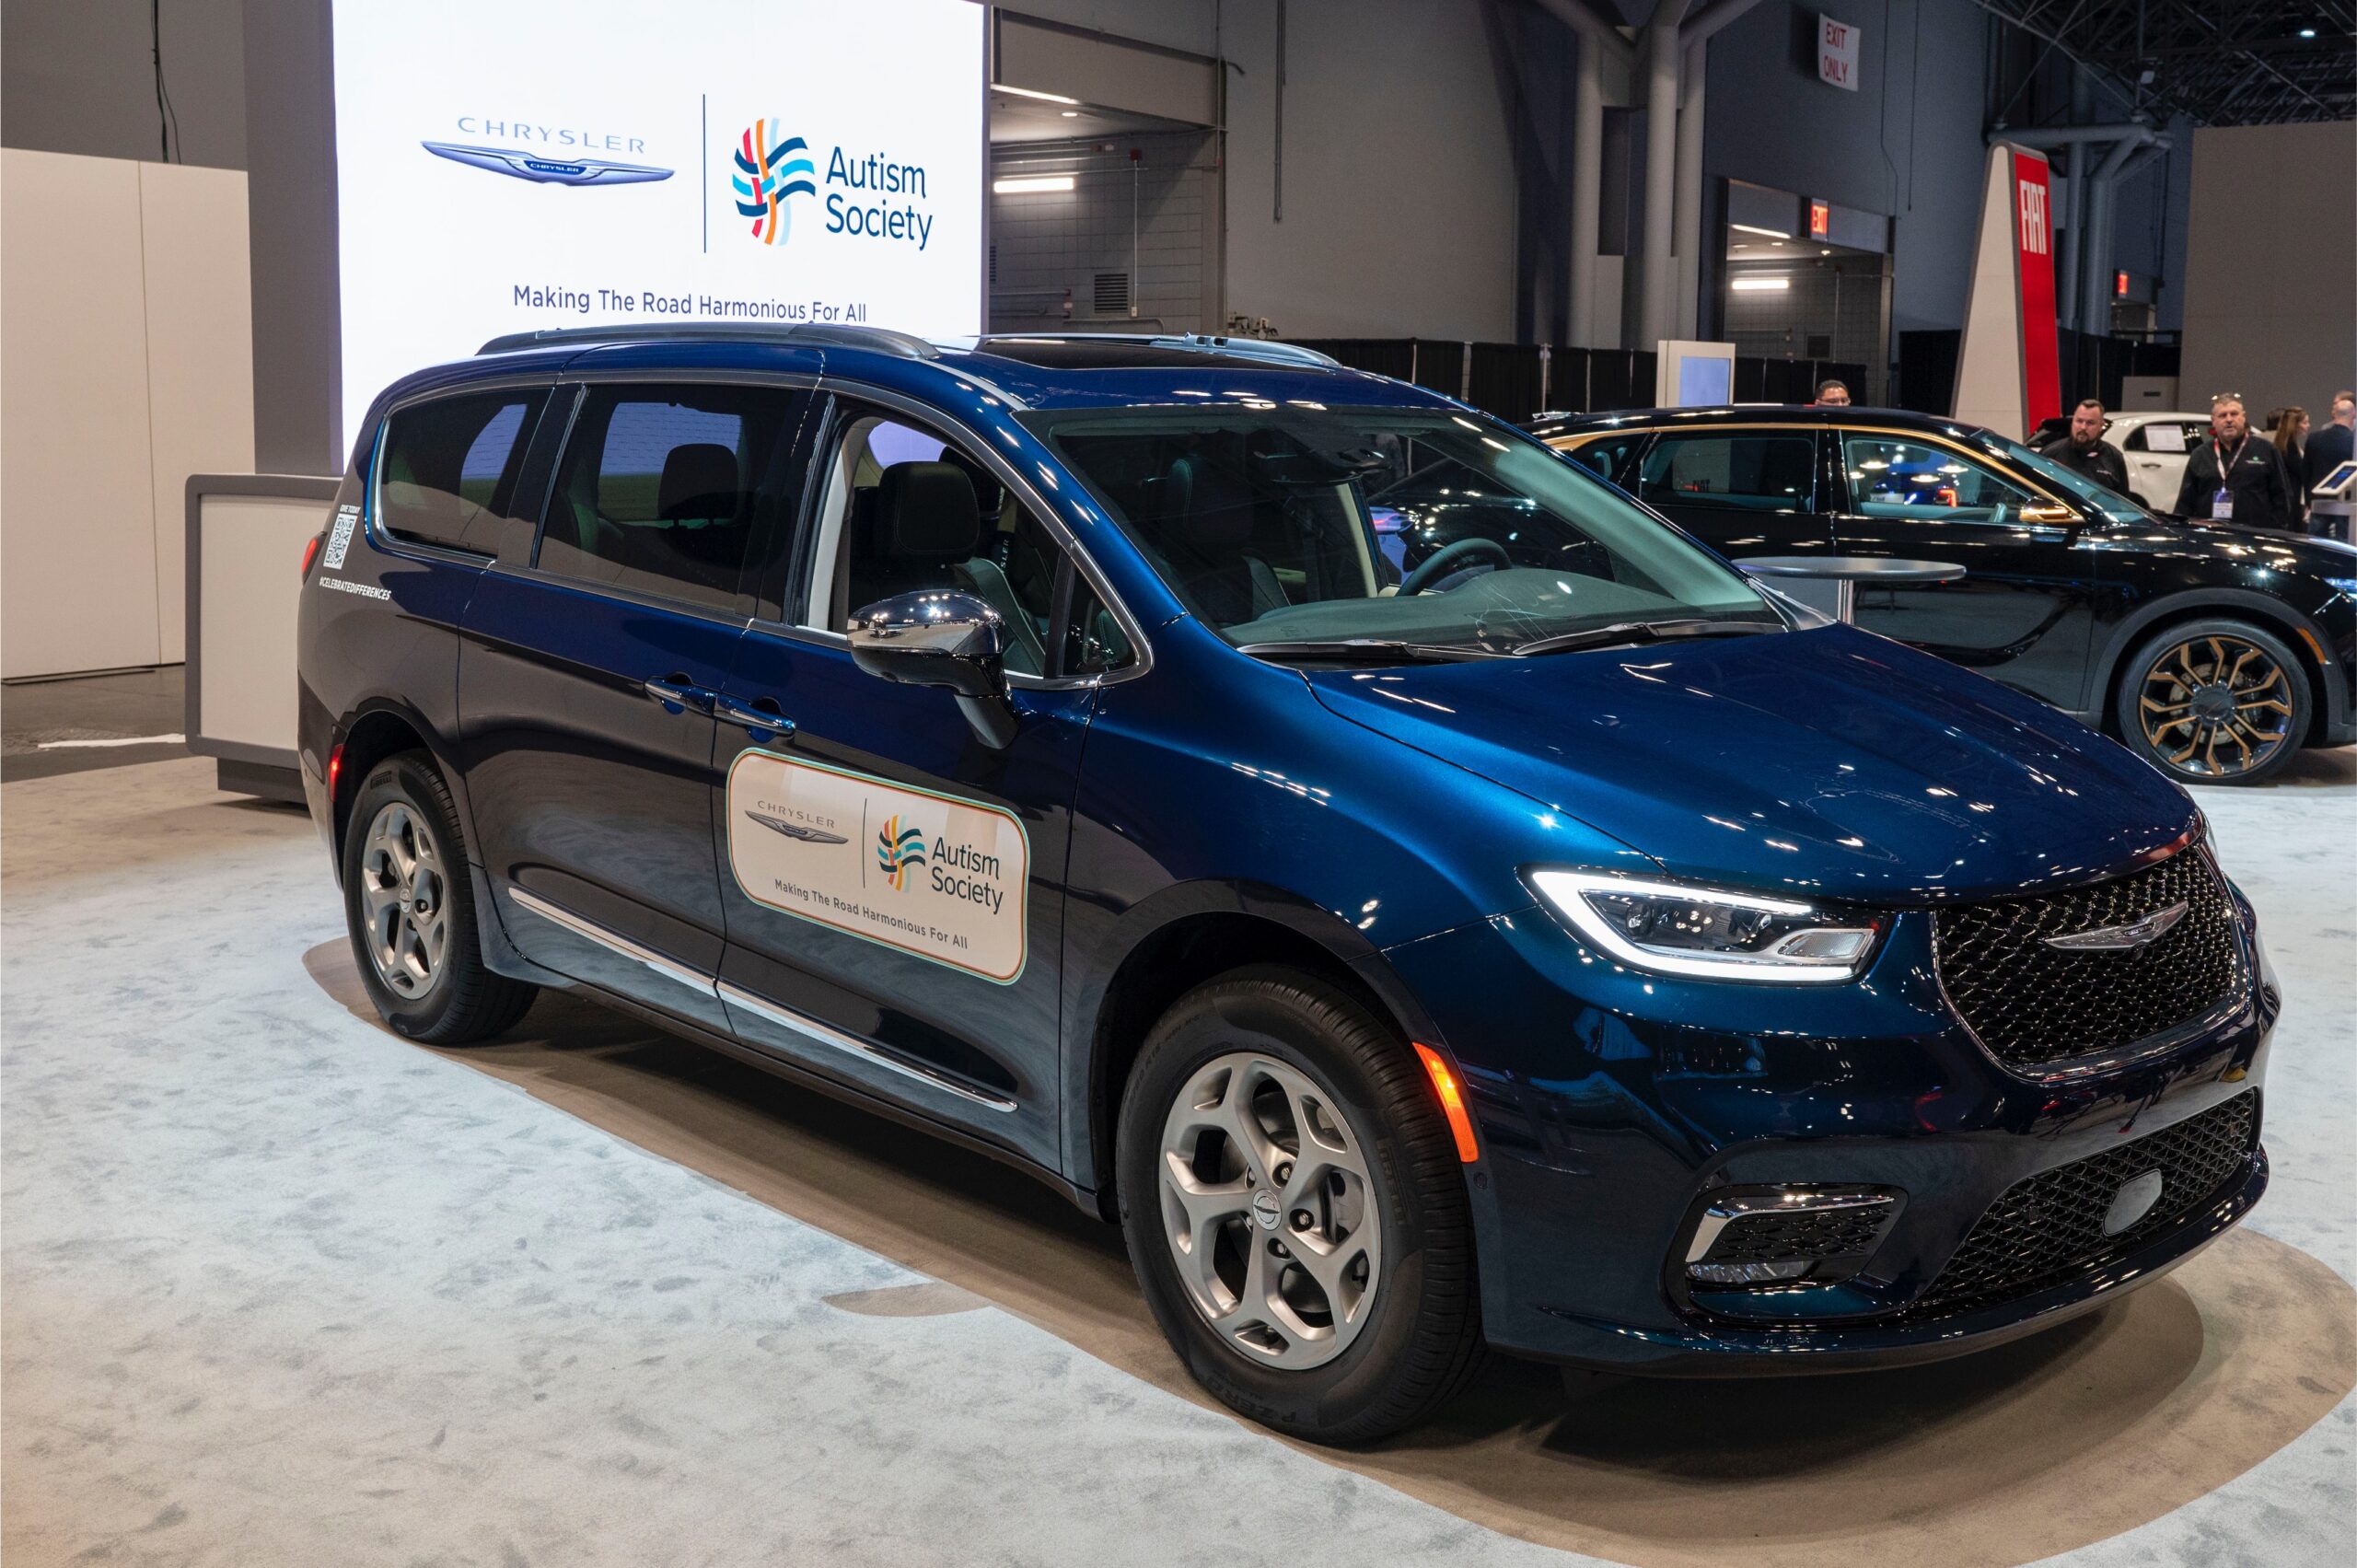 A blue Chrysler Pacifica minivan parked in a showroom. A white banner with the Autism Society and Chrysler brand logos is displayed behind the vehicle.